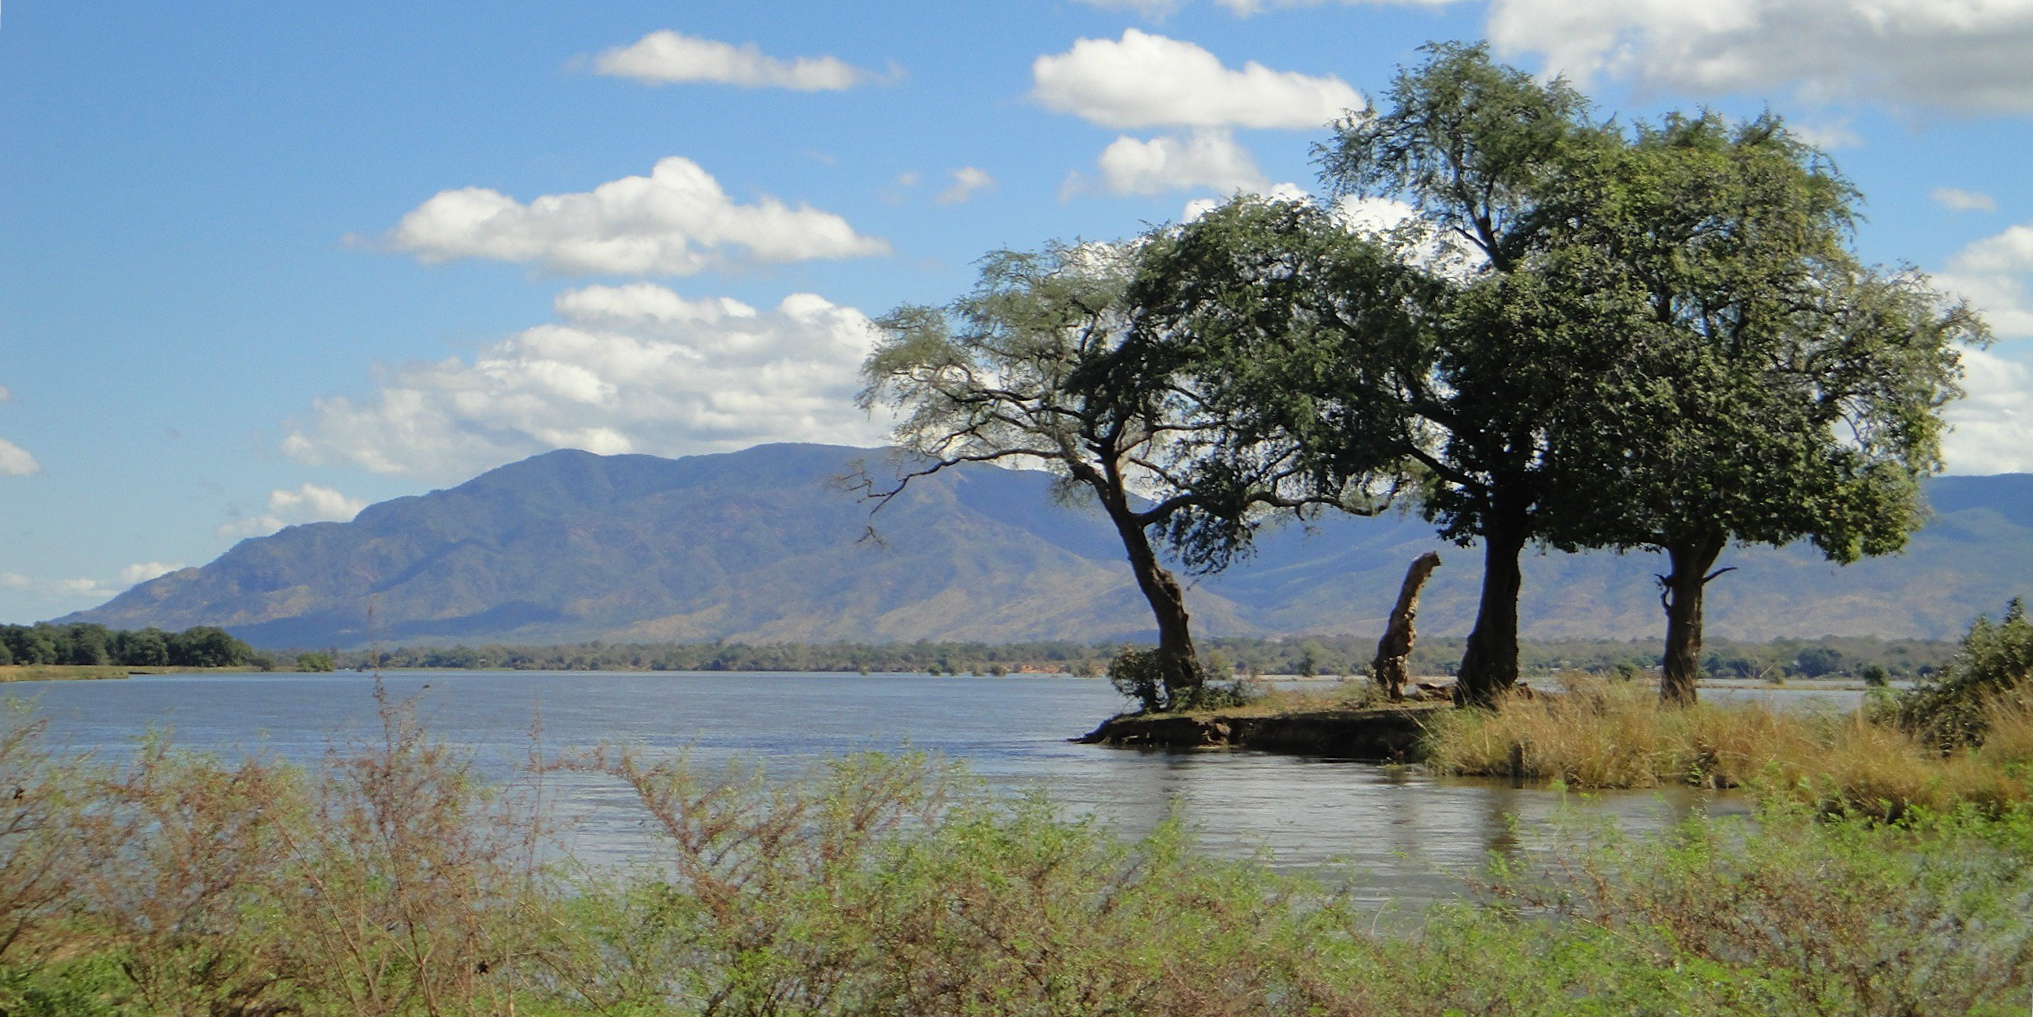 A wide expanse of water in Zambia is a great place to visit on a Zambia safari.